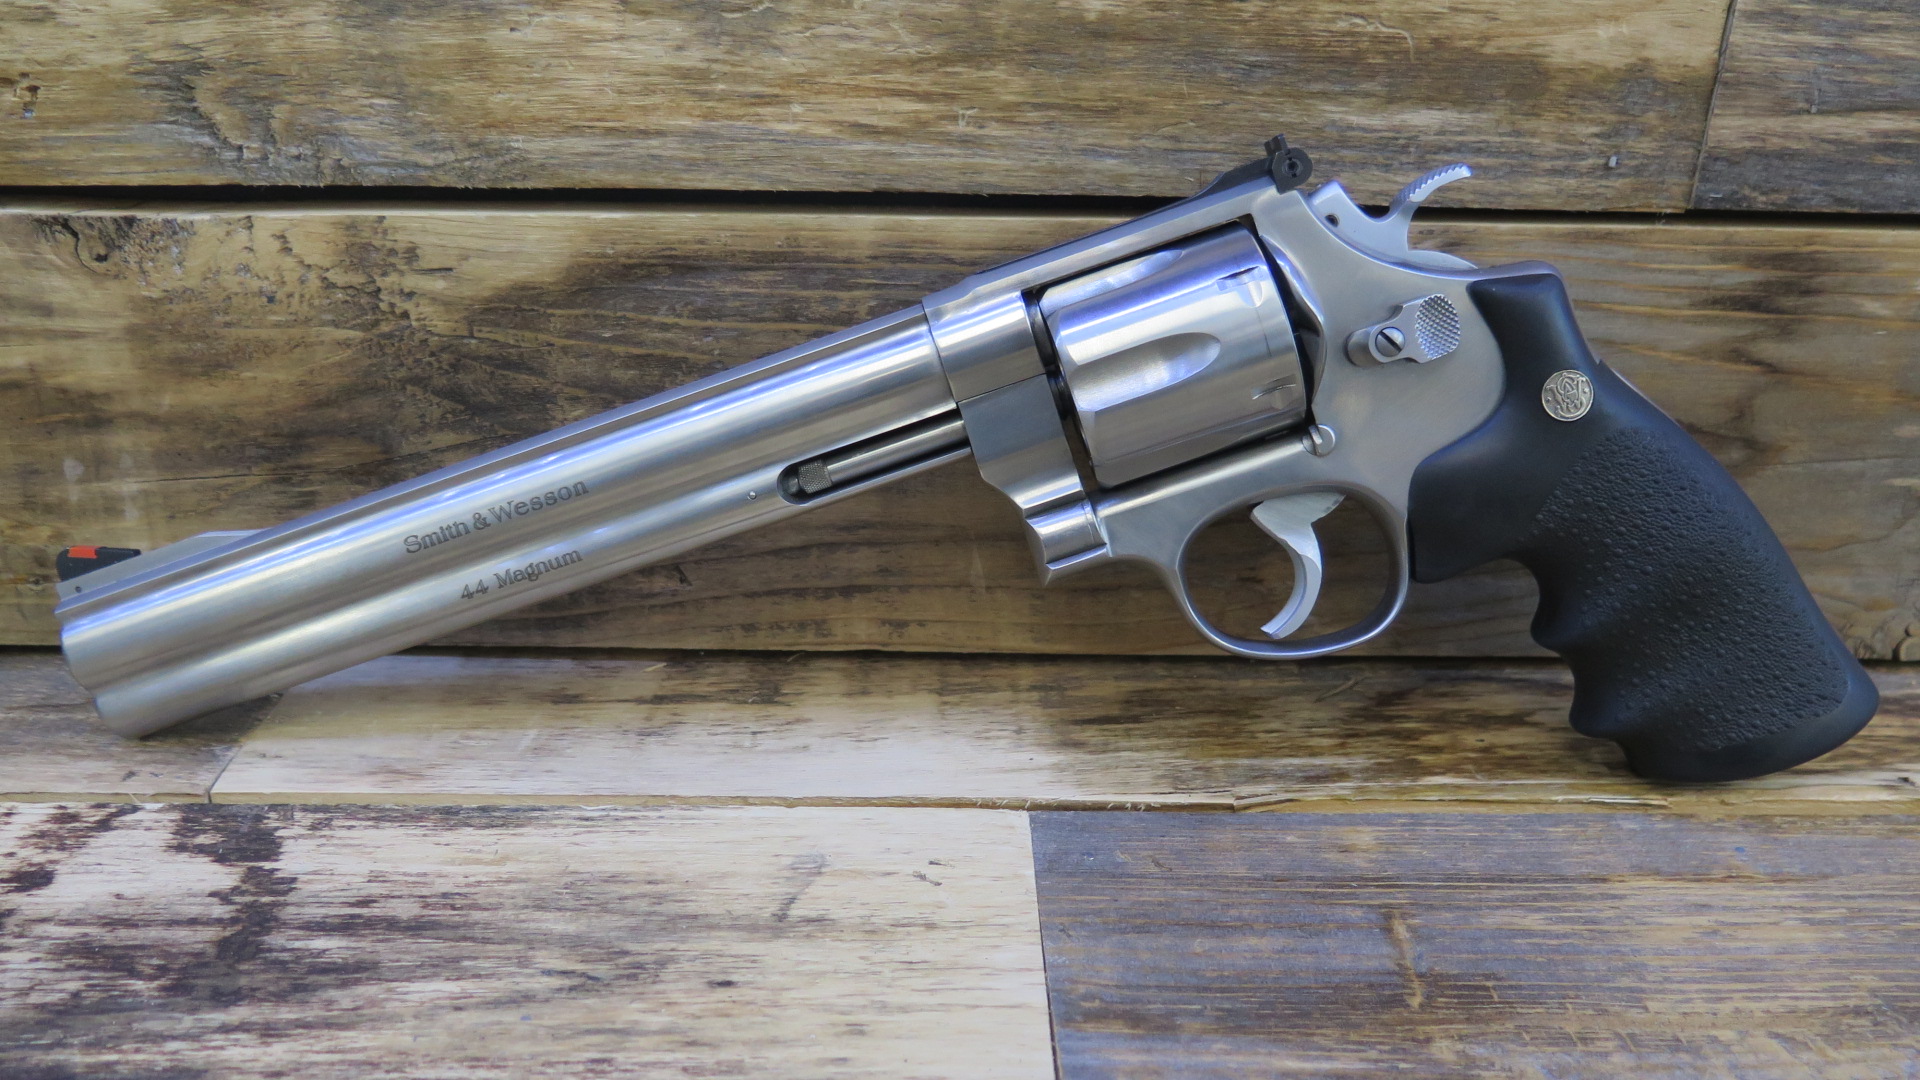 smith and wesson 44 magnum revolver model 629